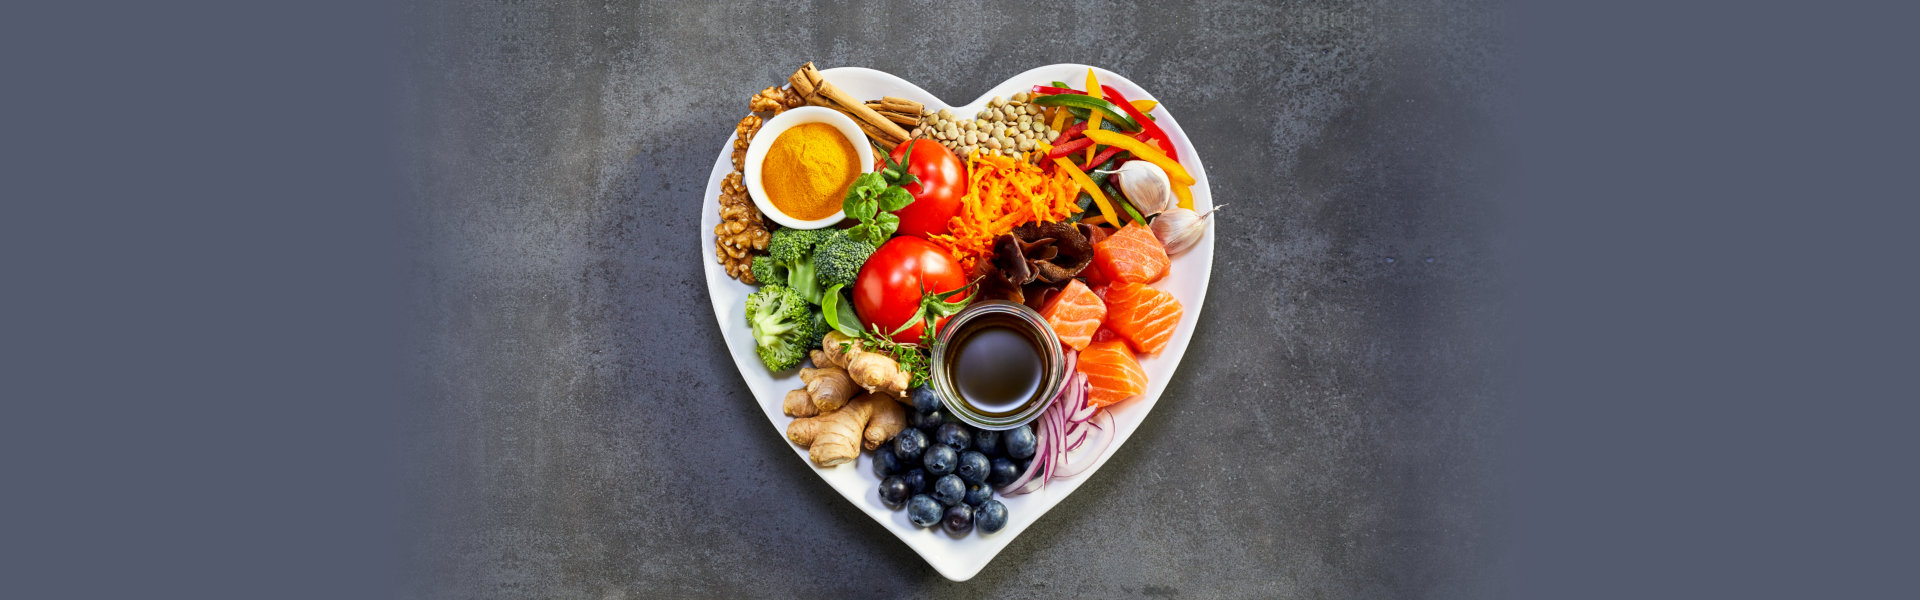 Healthy diet for the cardiovascular system